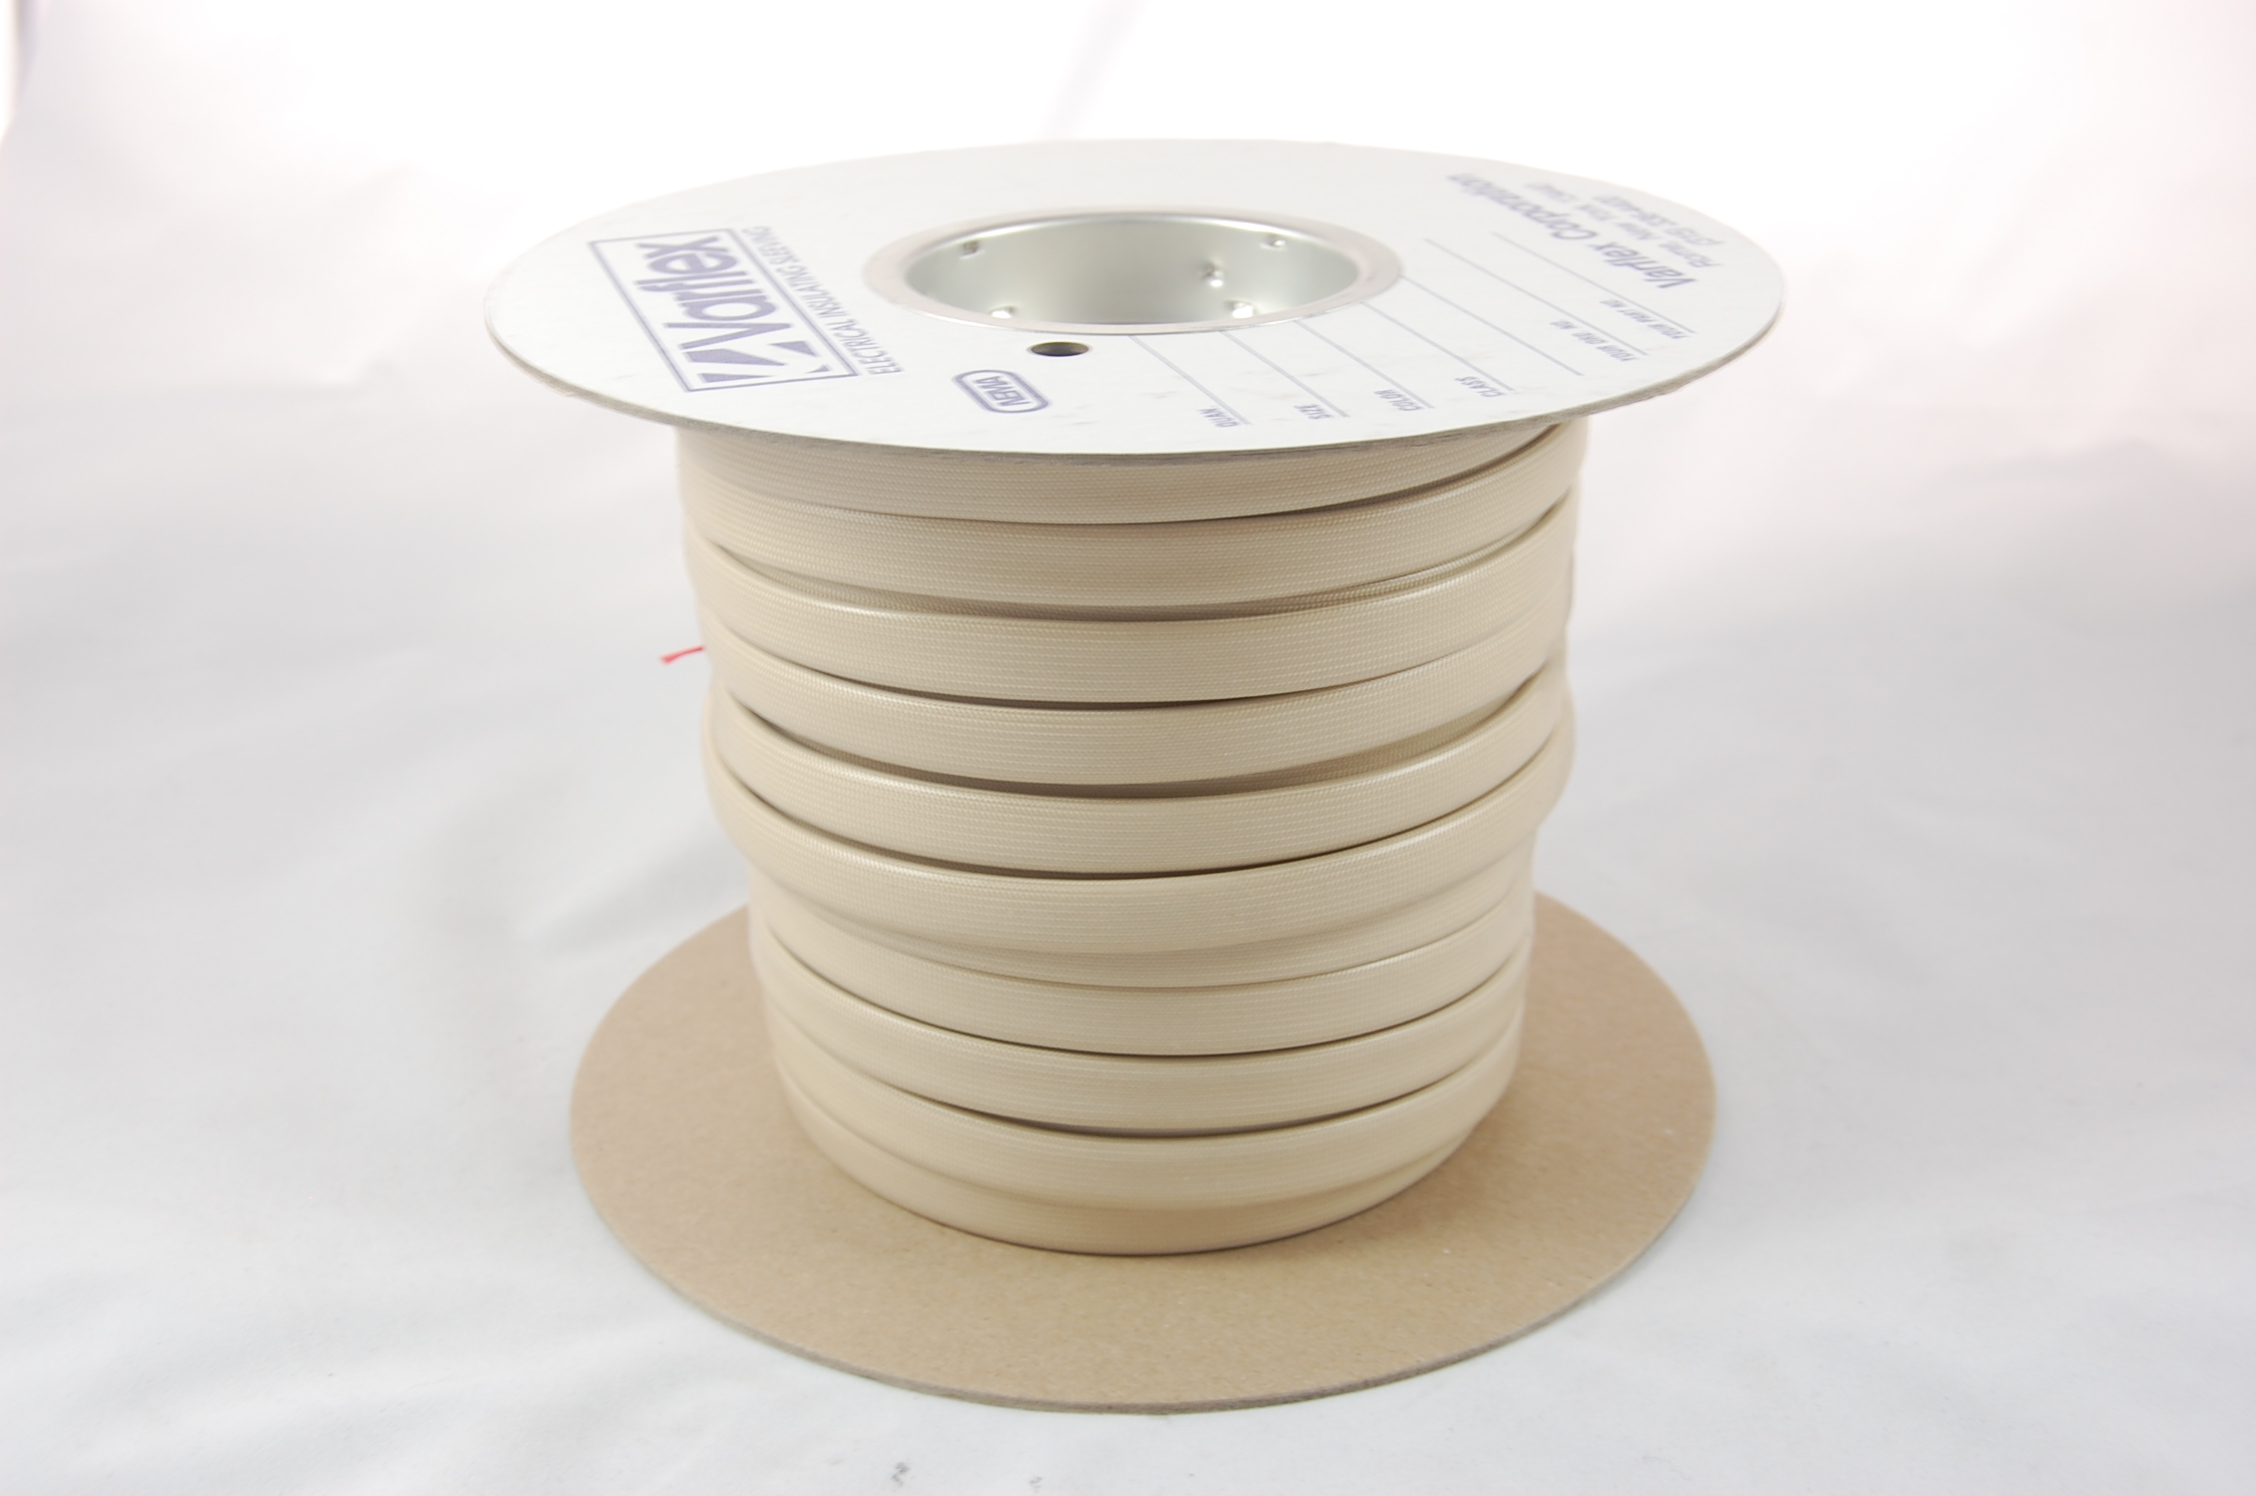 3/4" AWG Varglas Silicone Rubber Grade H-C-1 (2500V) High Temperature Silicone Rubber Coated Braided Fiberglass Sleeving 200°C, natural, 100 FT per spool